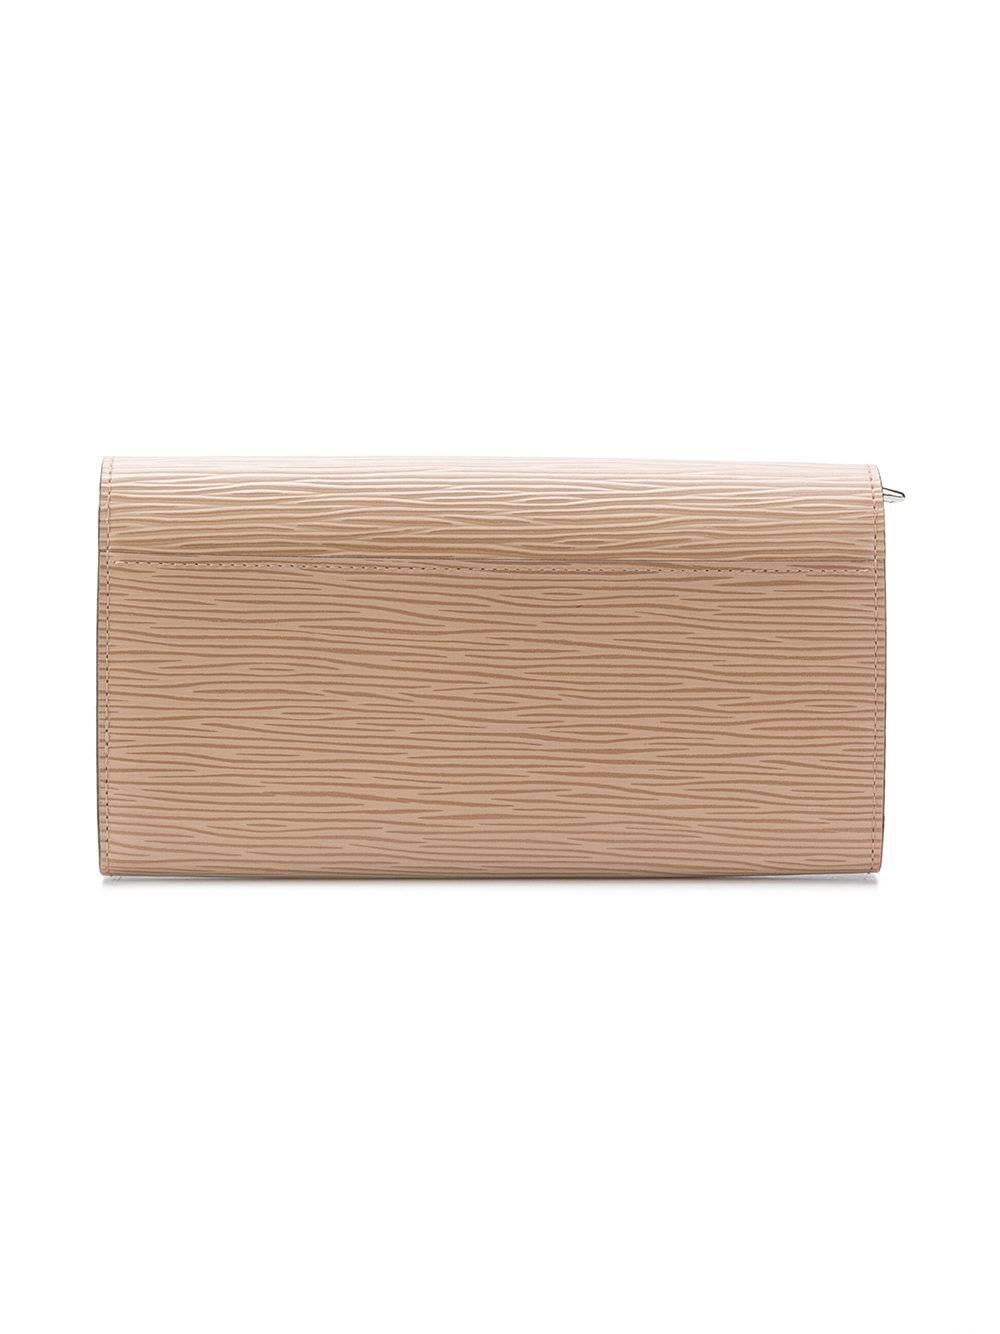 This Dune coloured epi-texture leather 'Sarah' wallet from Louis Vuitton features a foldover top with snap closure, a varnished finish, an interior zipped compartment, multiple interior card slots and an internal logo stamp.

This item comes with